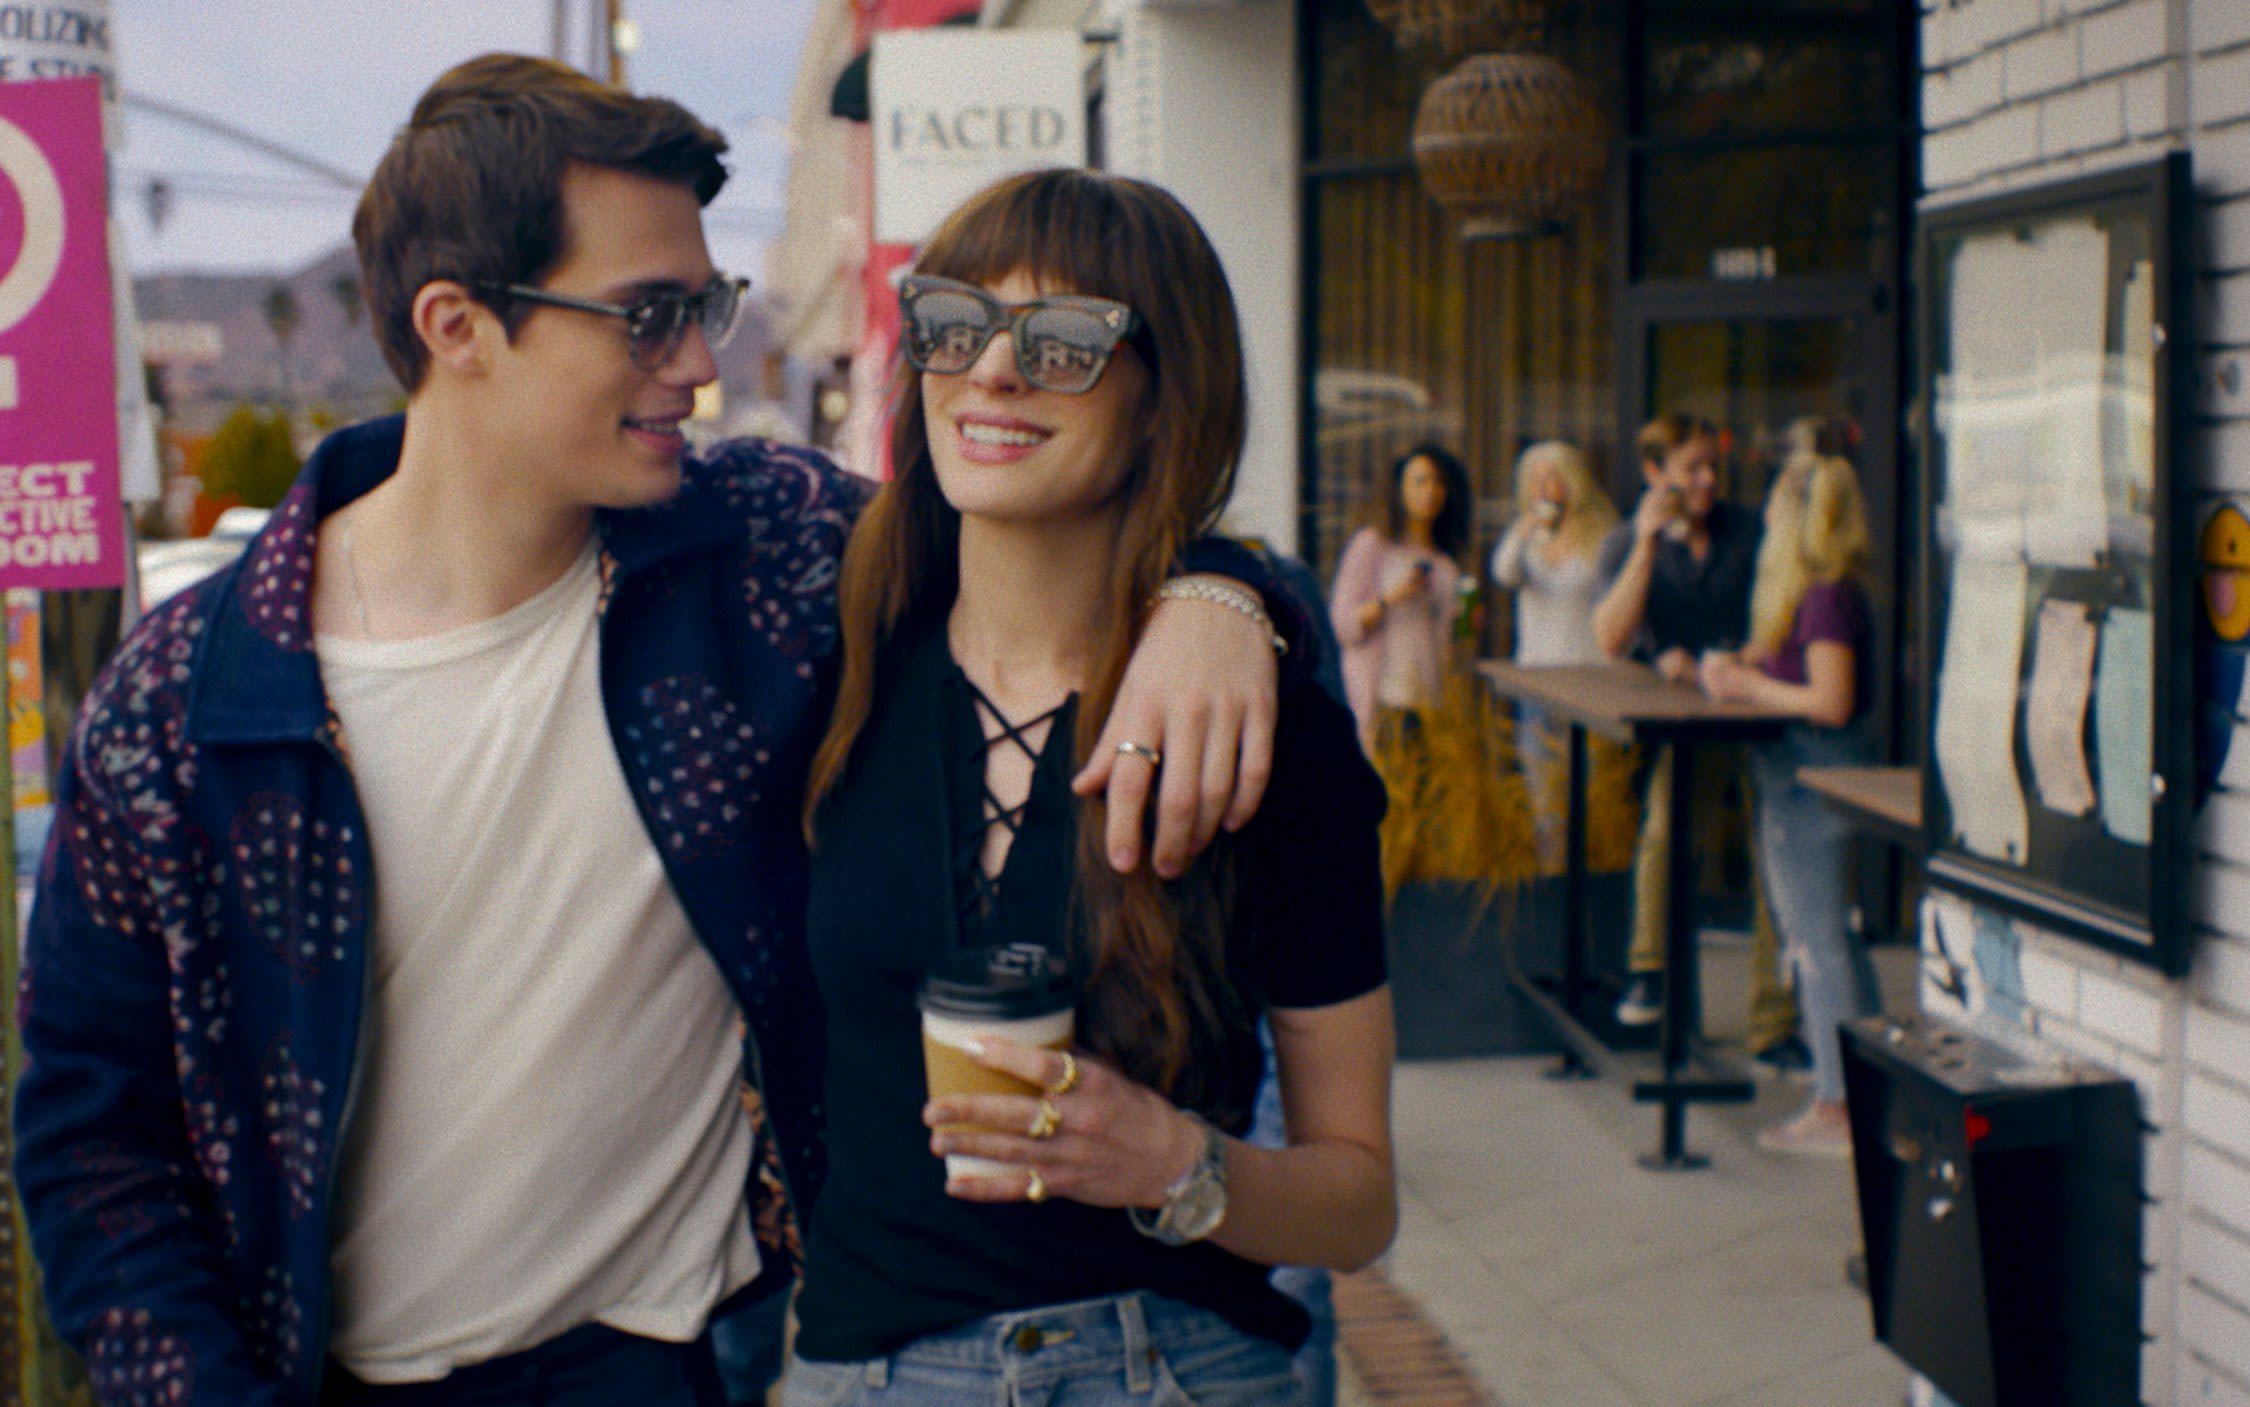 The Idea of You: Anne Hathaway’s skin-fizzing romcom gets all the dumb stuff just right